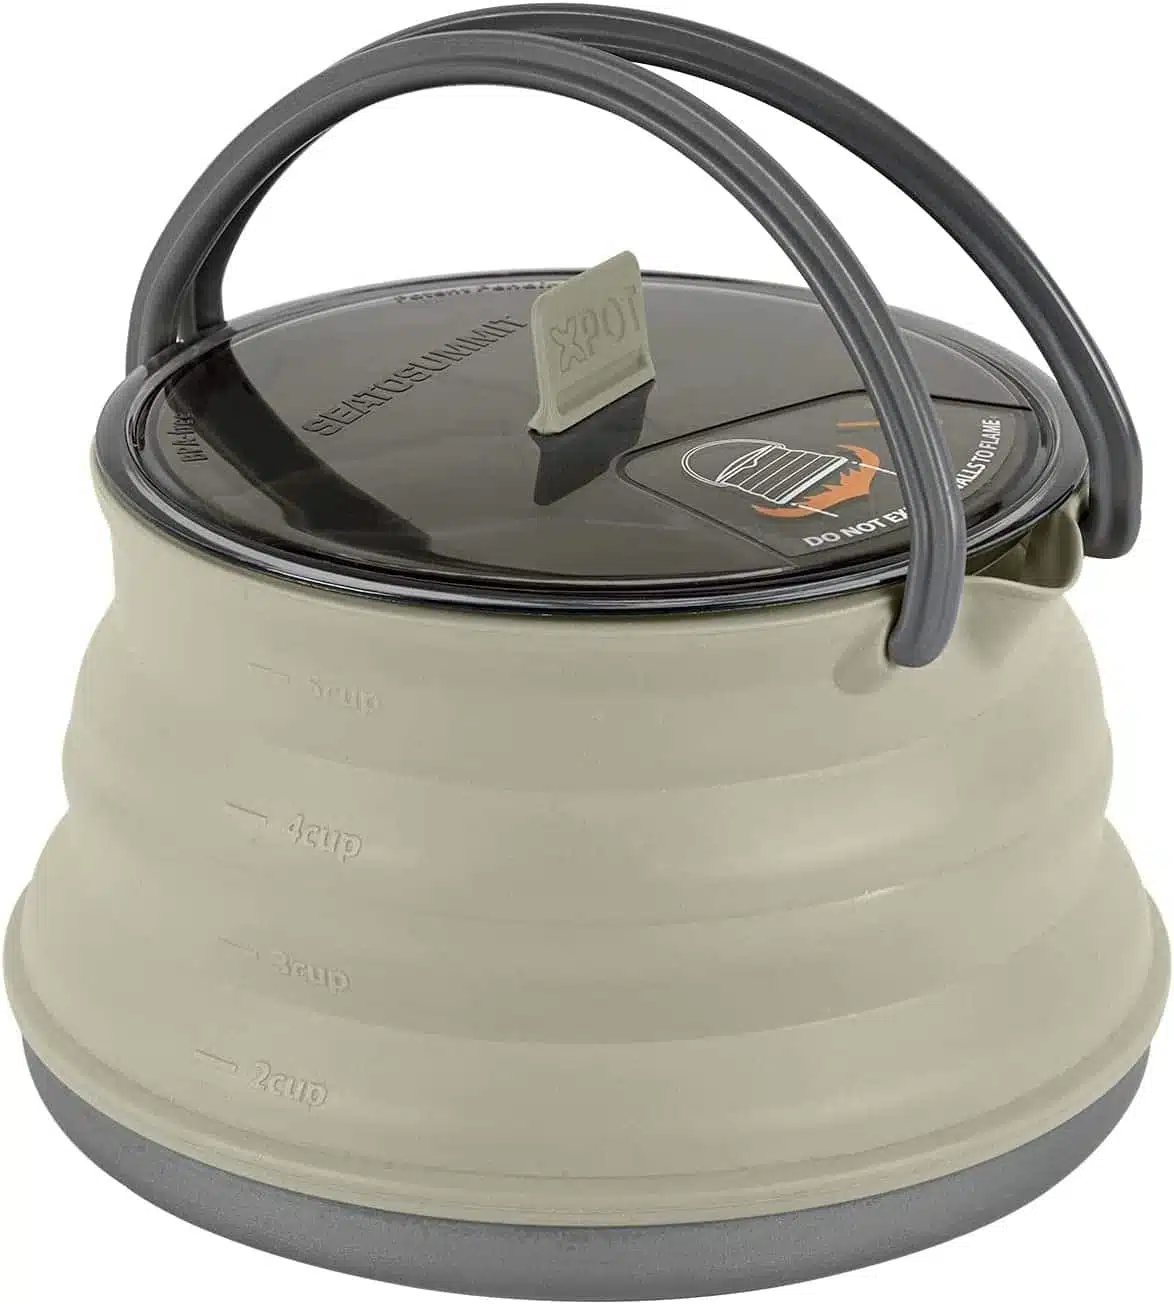 sea to summit x-pot collapsible kettle